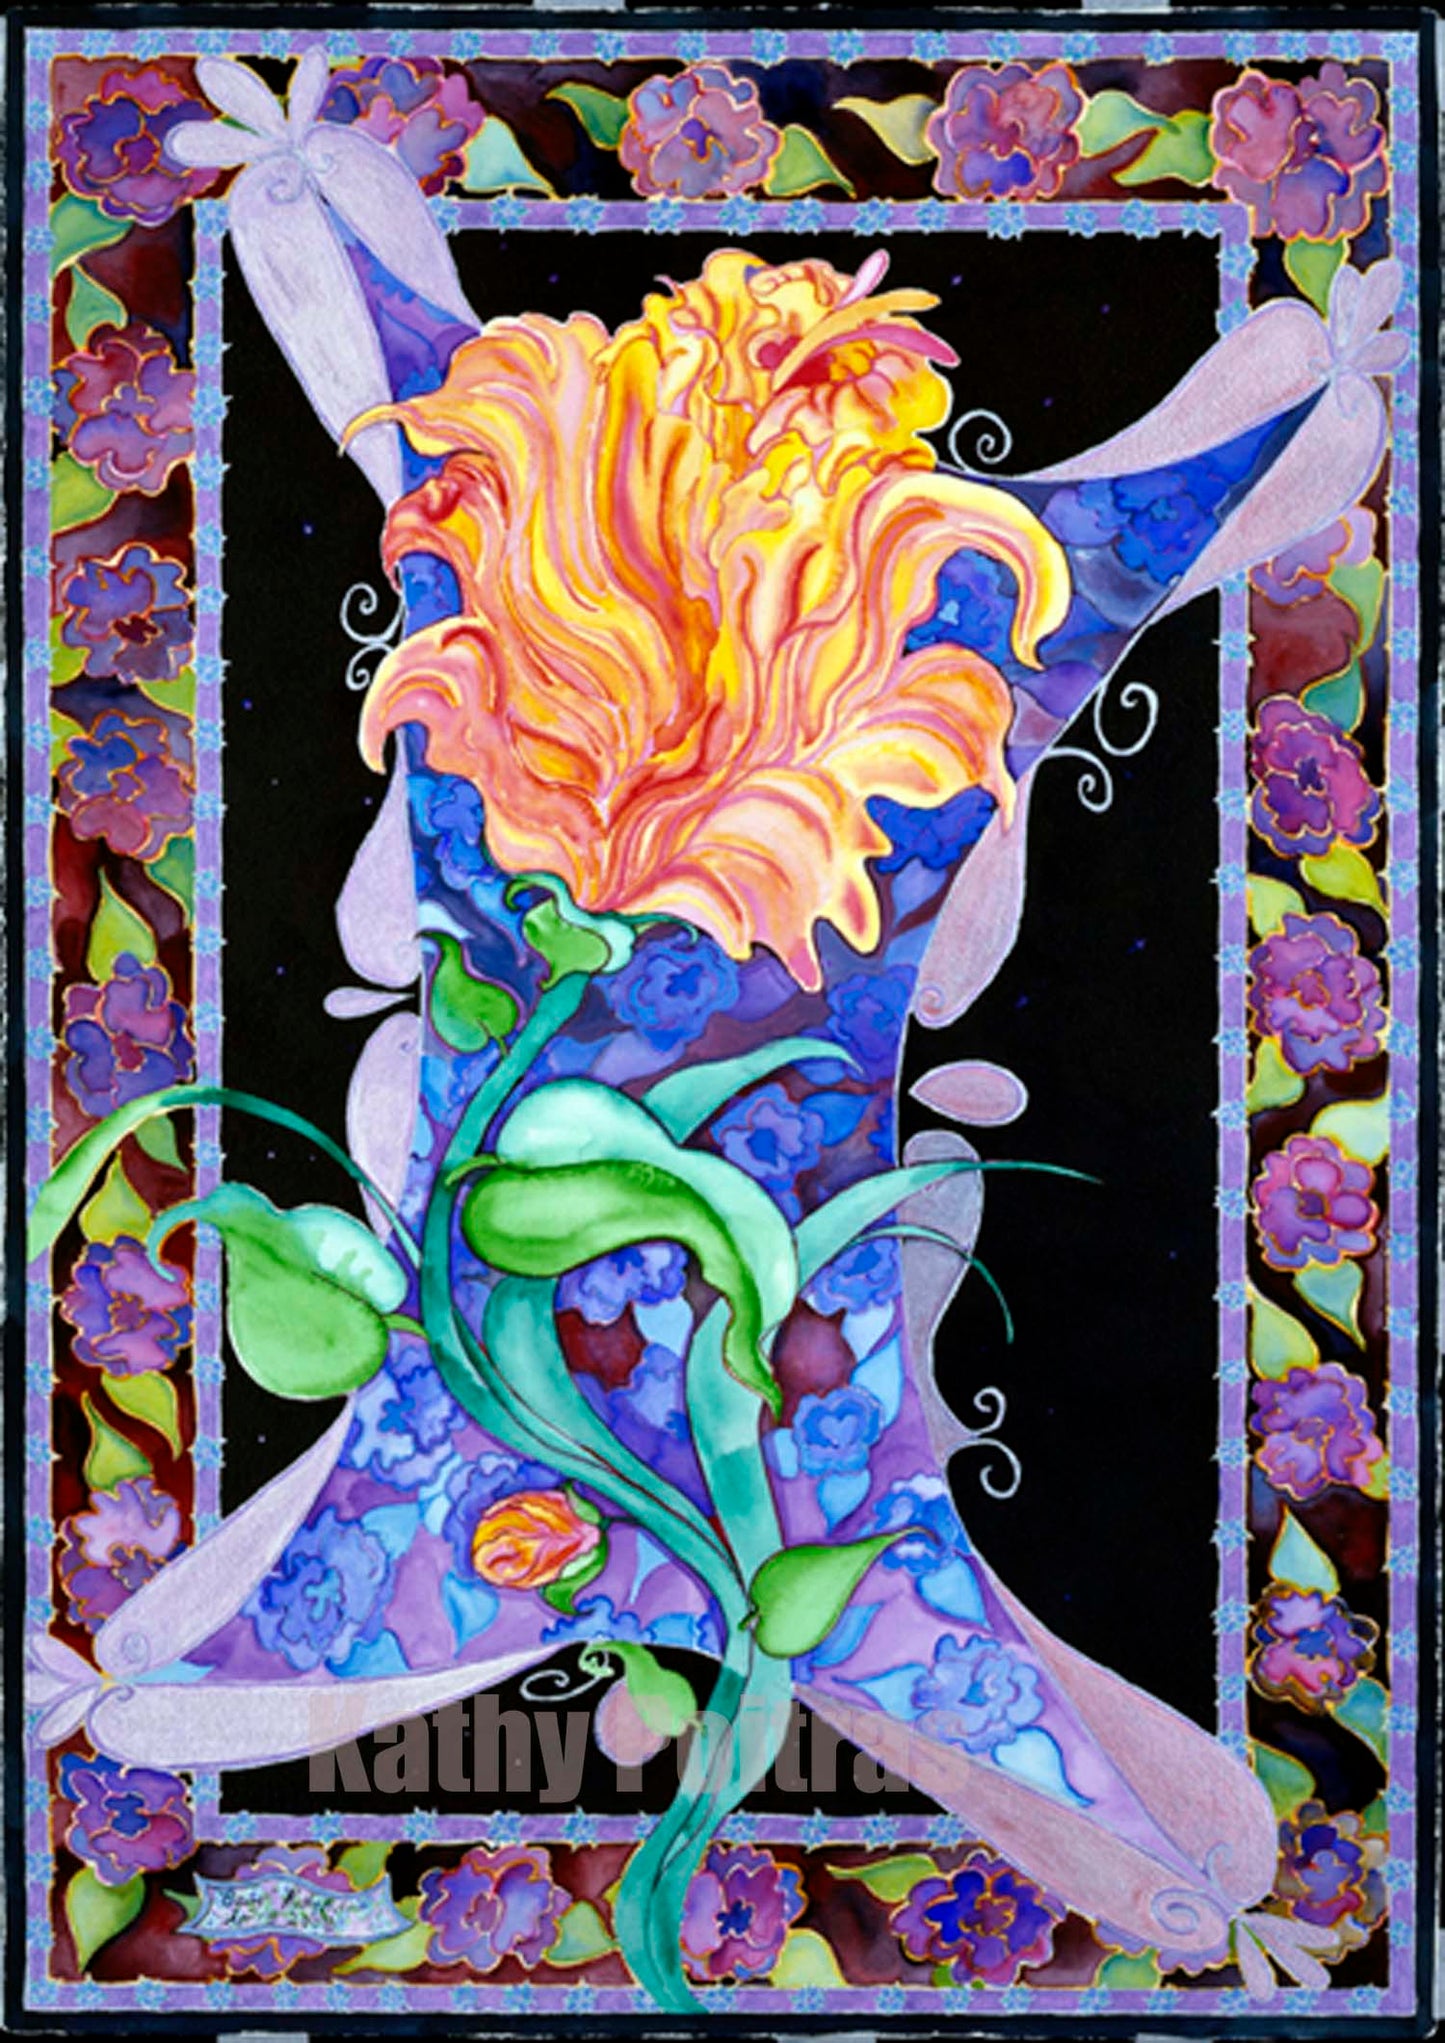 Being . Large watercolor and ink abstract flower painting